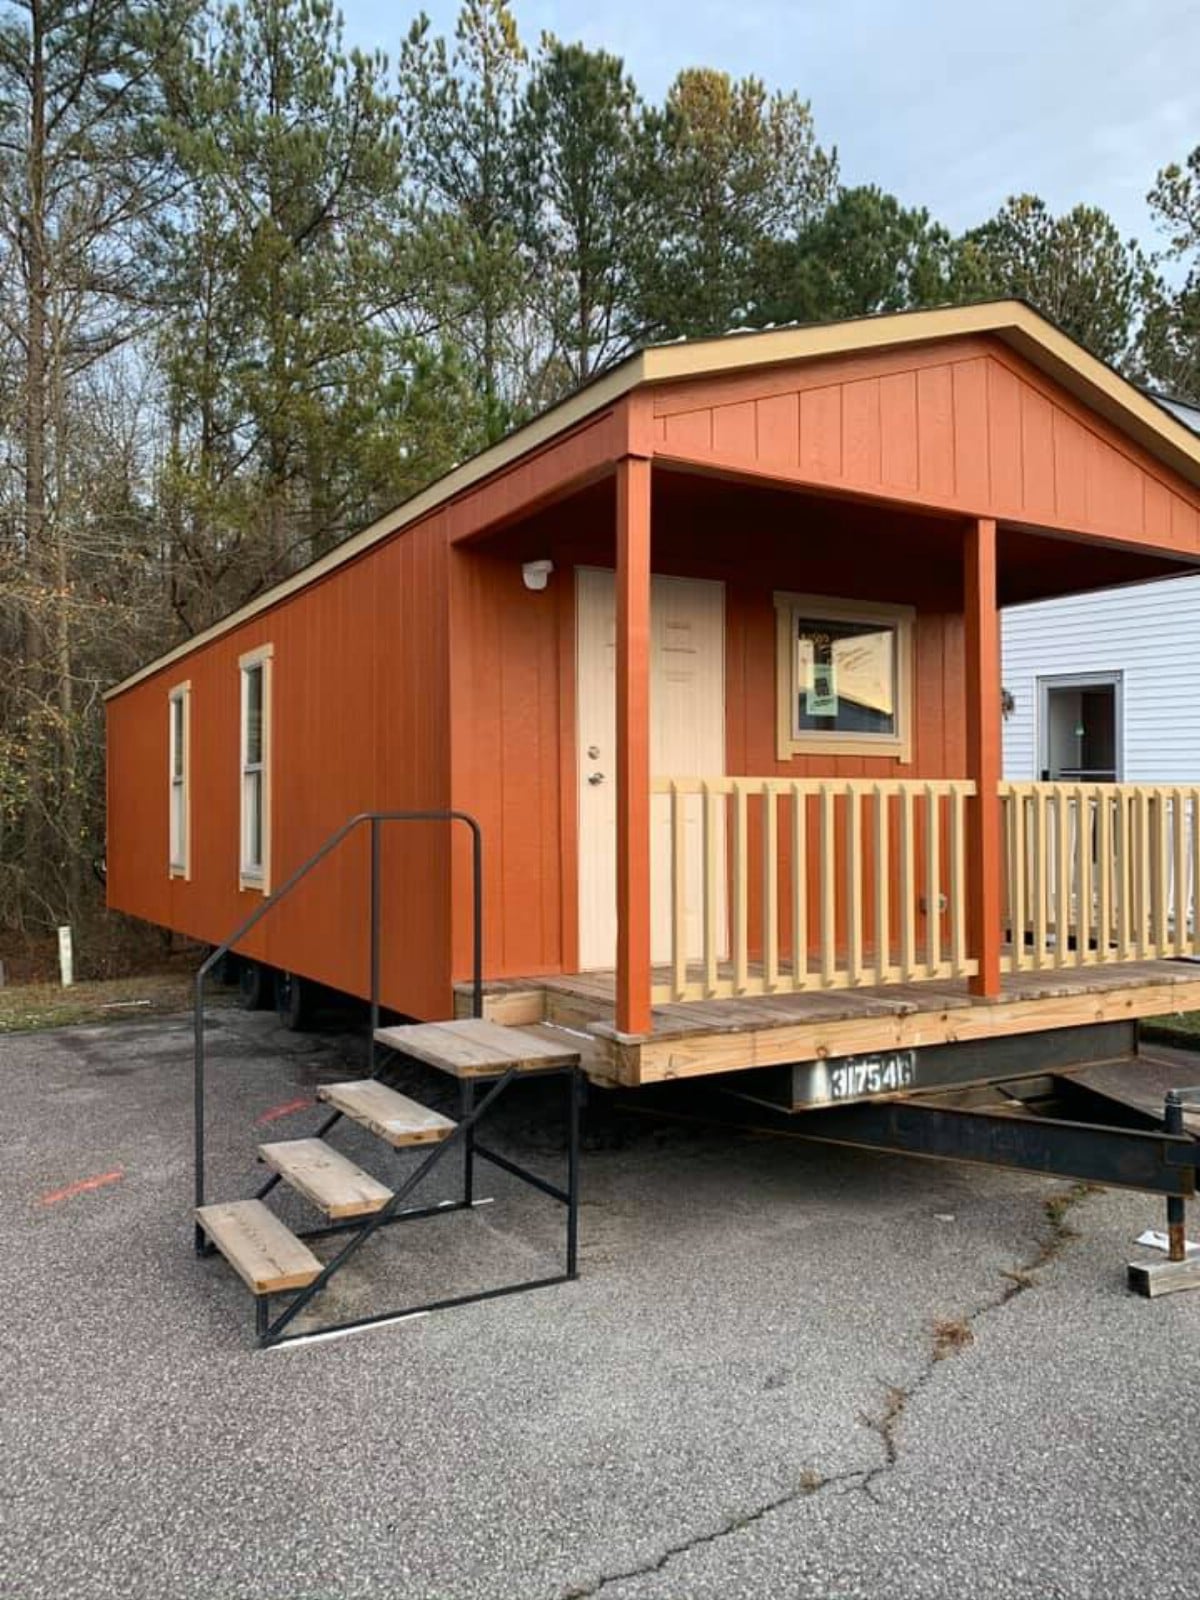 This Tiny House in Georgia is For Sale For Just $27,500